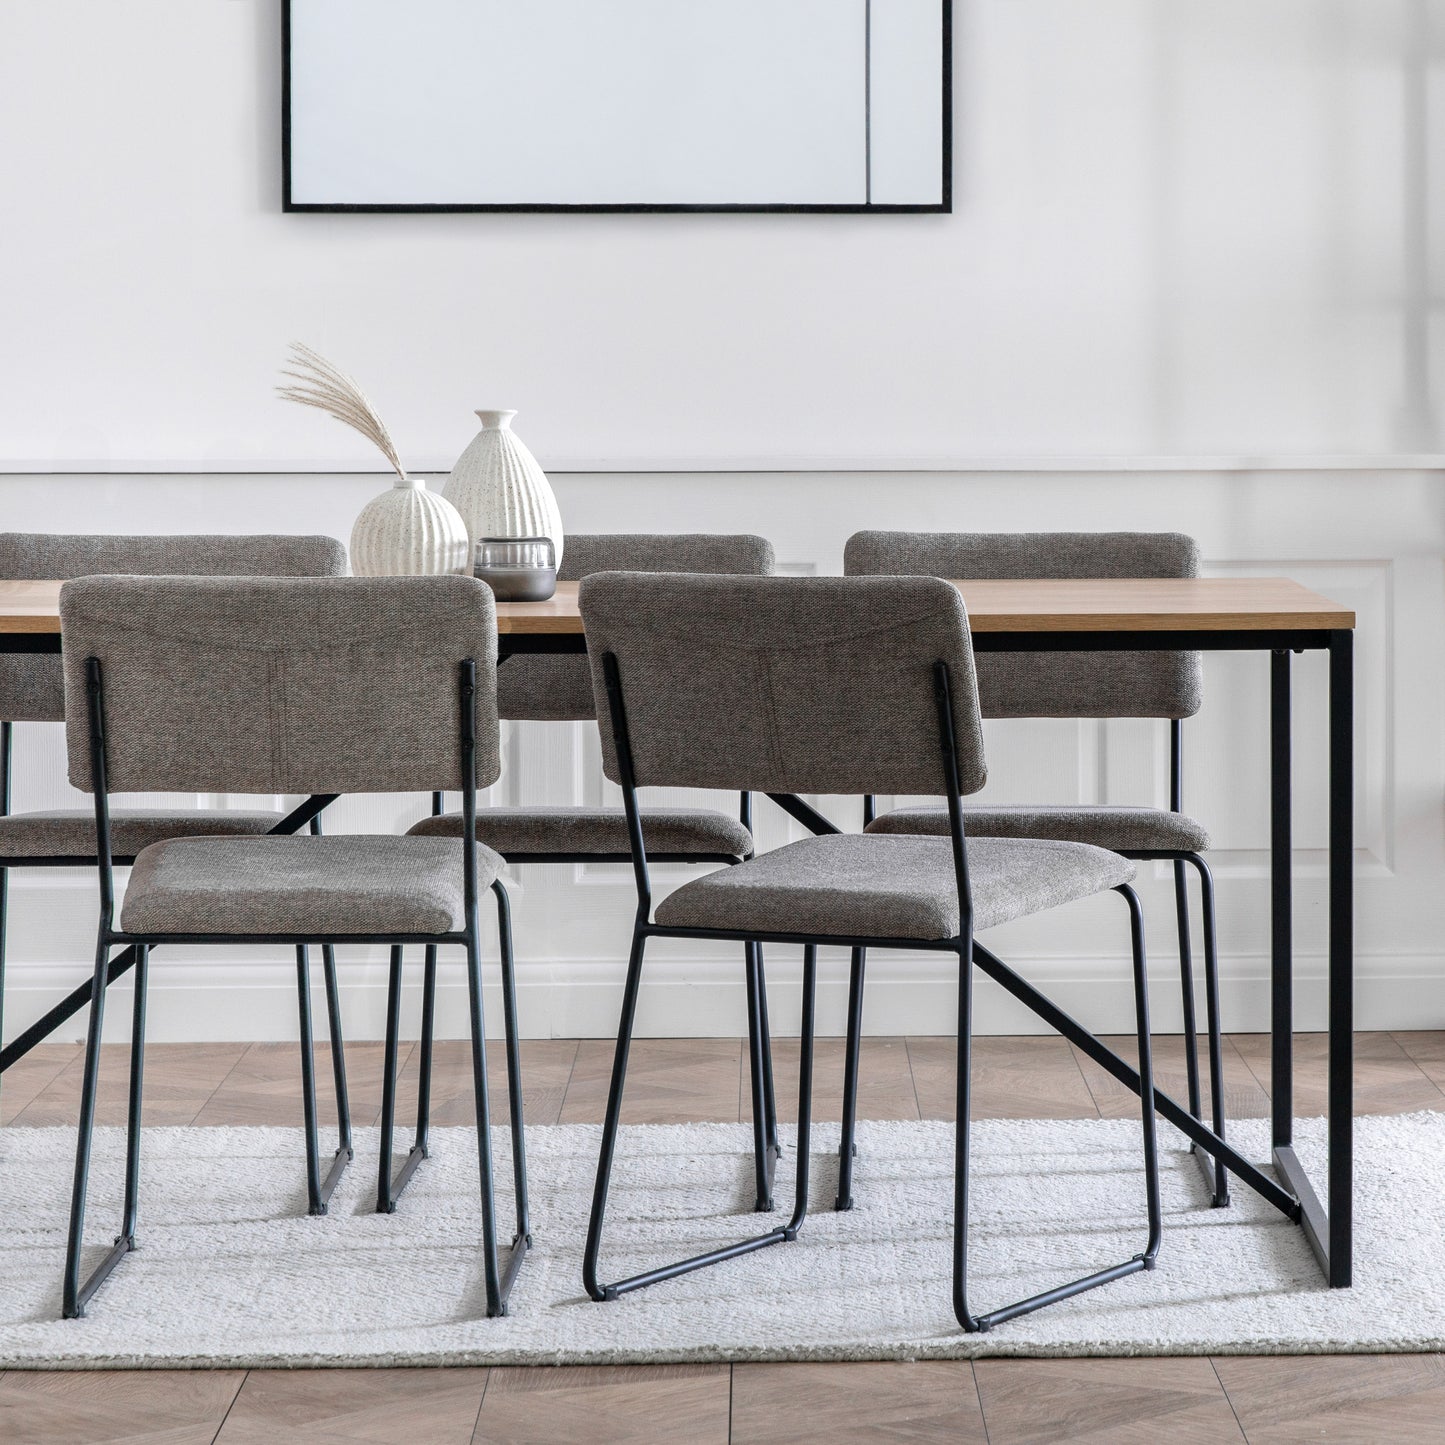 A Staverton Dining Table 1800x900x750mm with four chairs and a framed picture, ideal for interior decor or home furniture enthusiasts, from Kikiathome.co.uk.